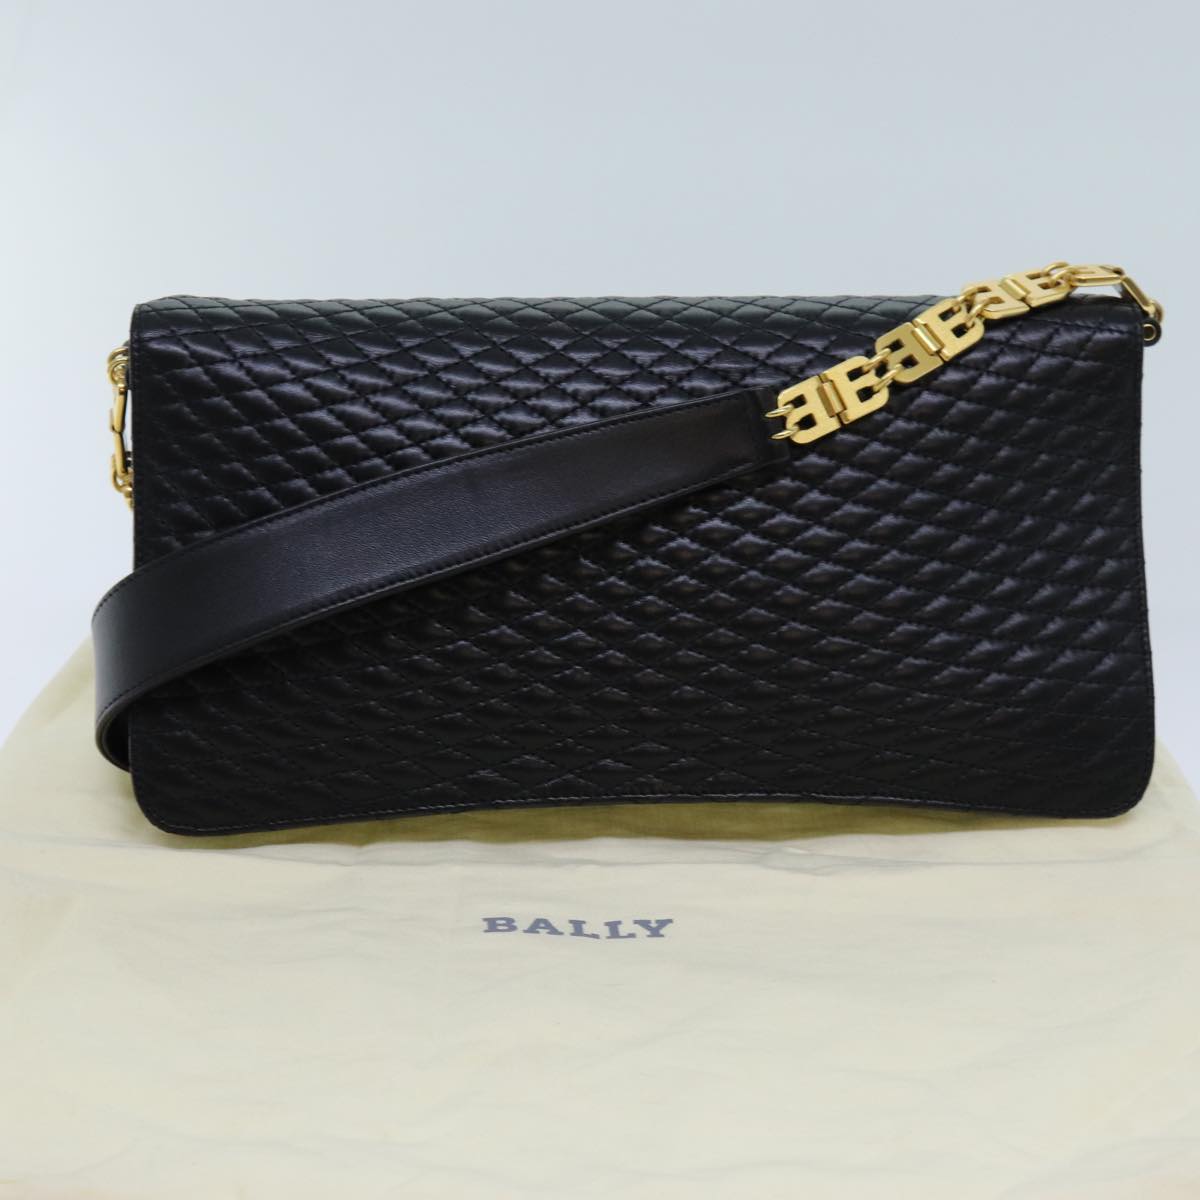 BALLY Quilted Shoulder Bag Leather Black Auth yk11853